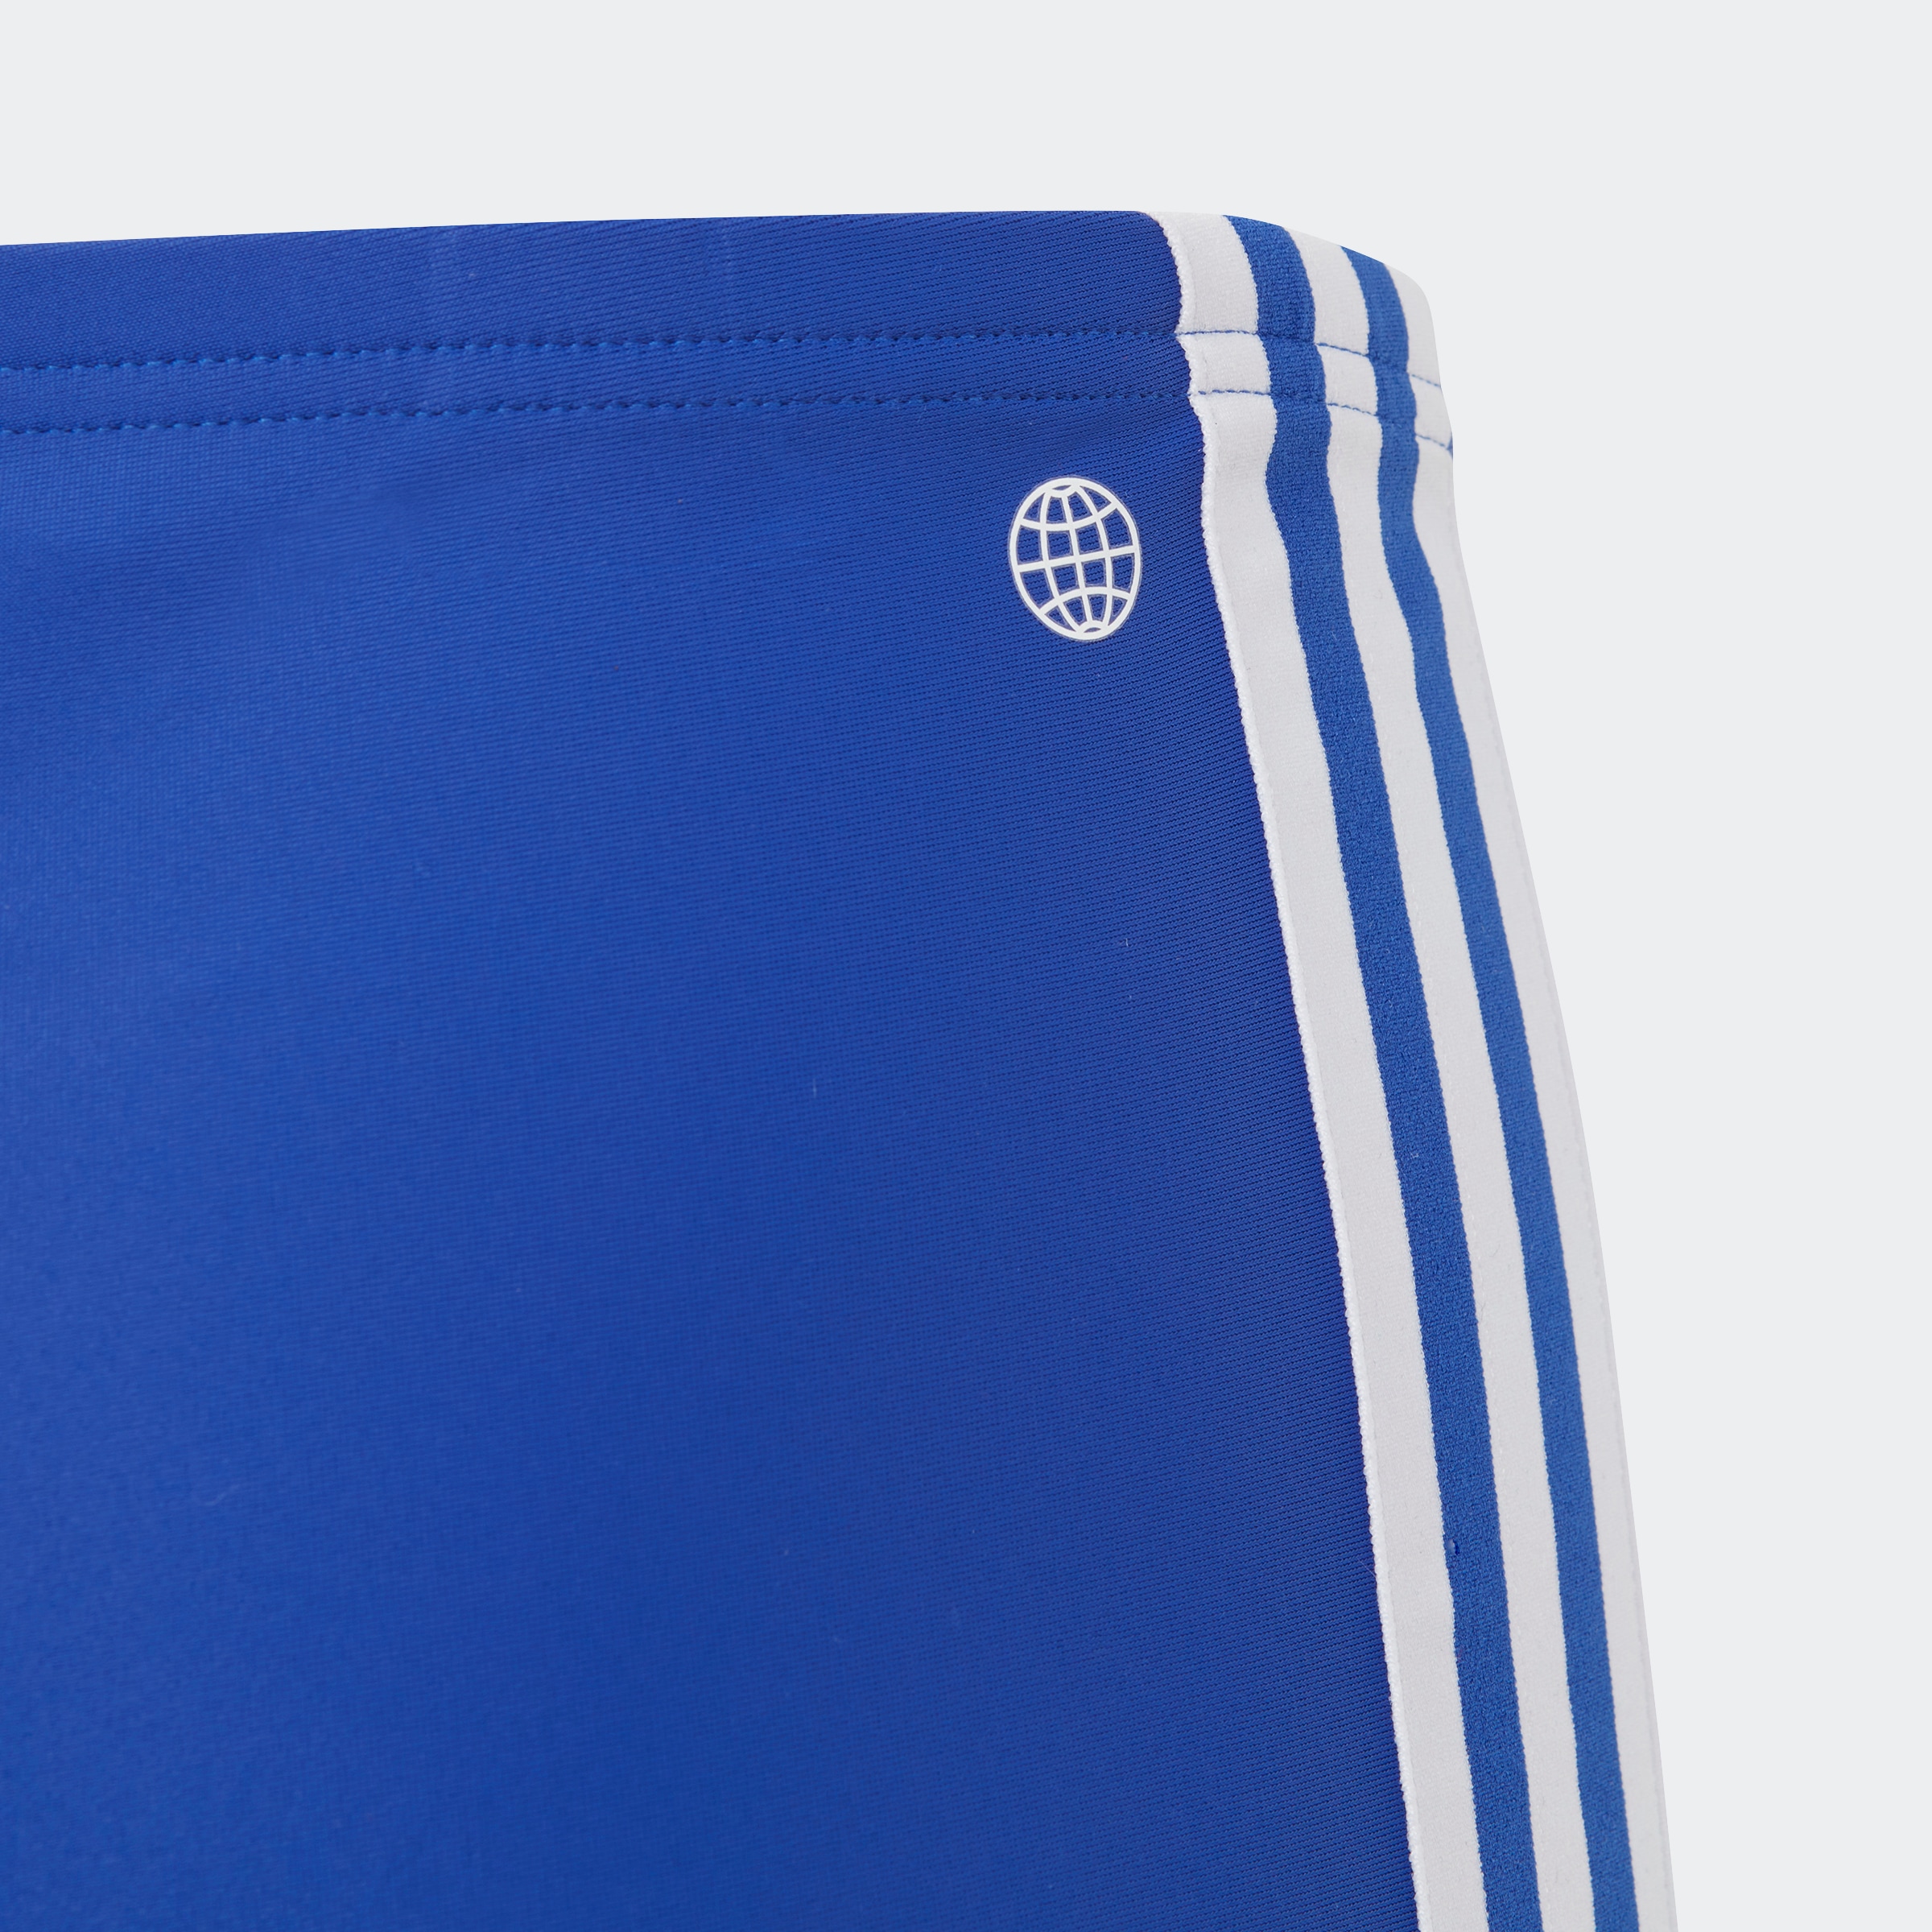 adidas Performance Badehose »3S BOXER«, (1 bei St.)